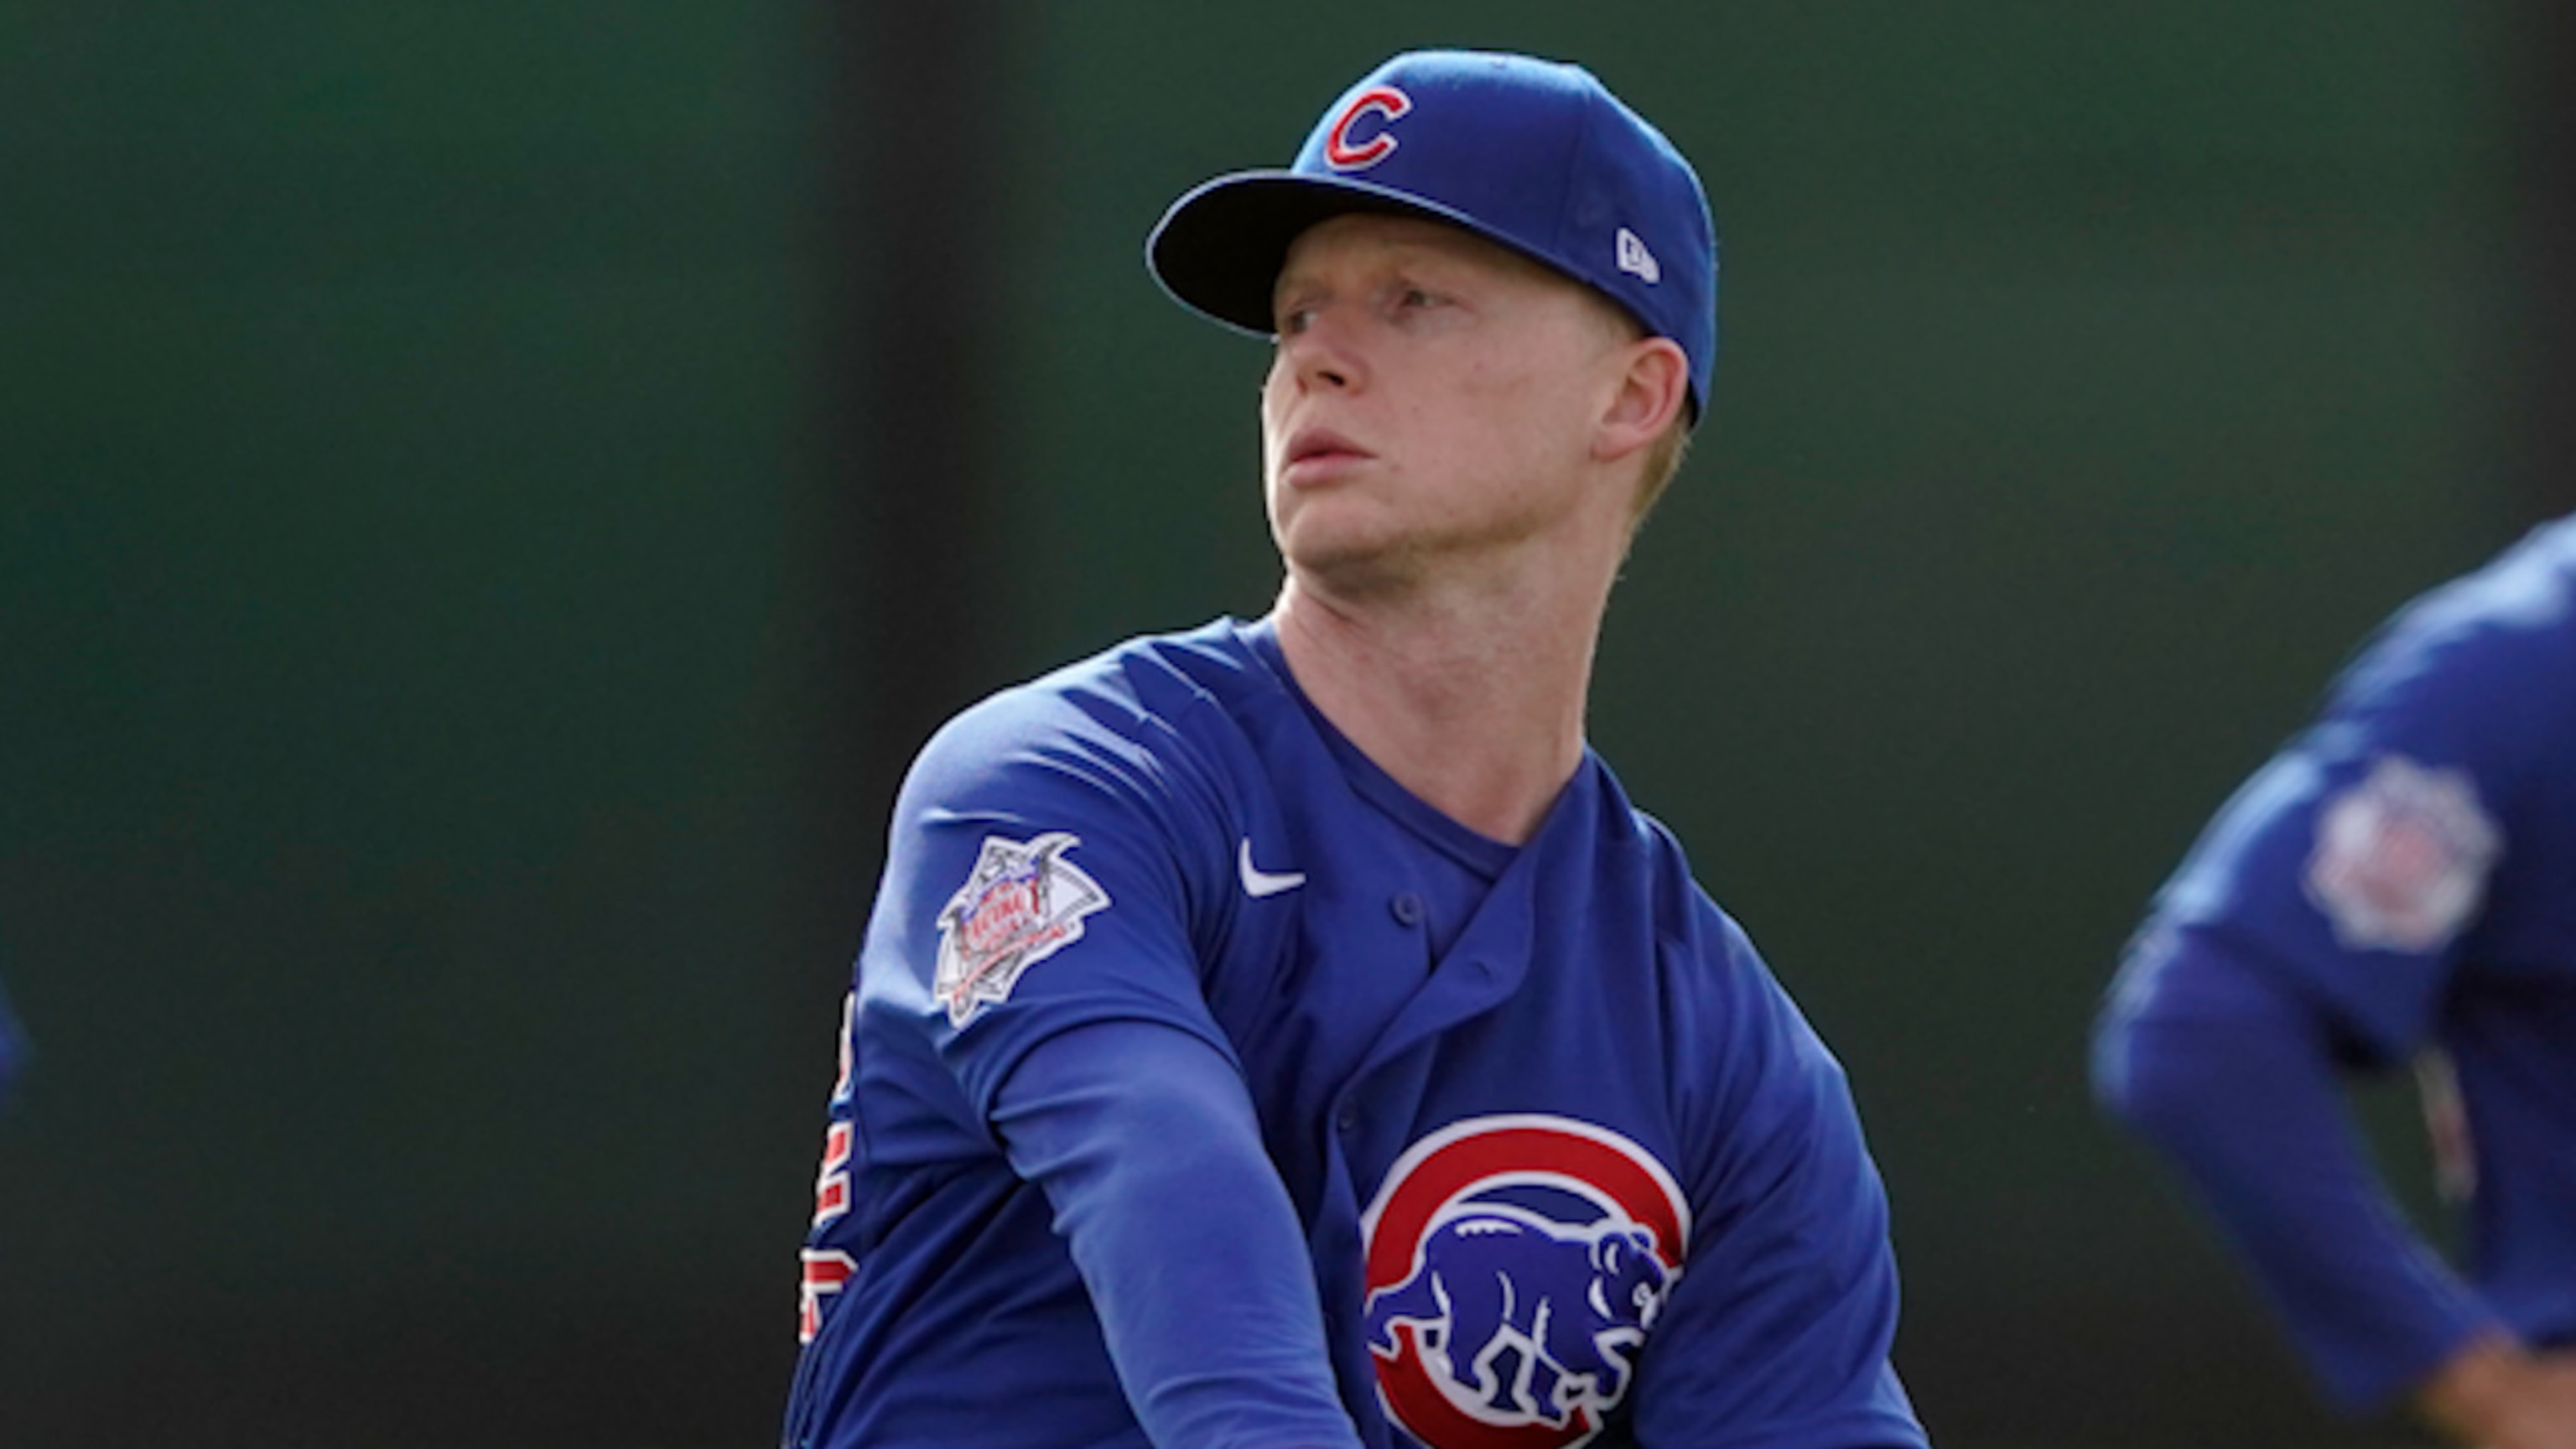 South Bend Cubs roster sees turnover, South Bend Cubs